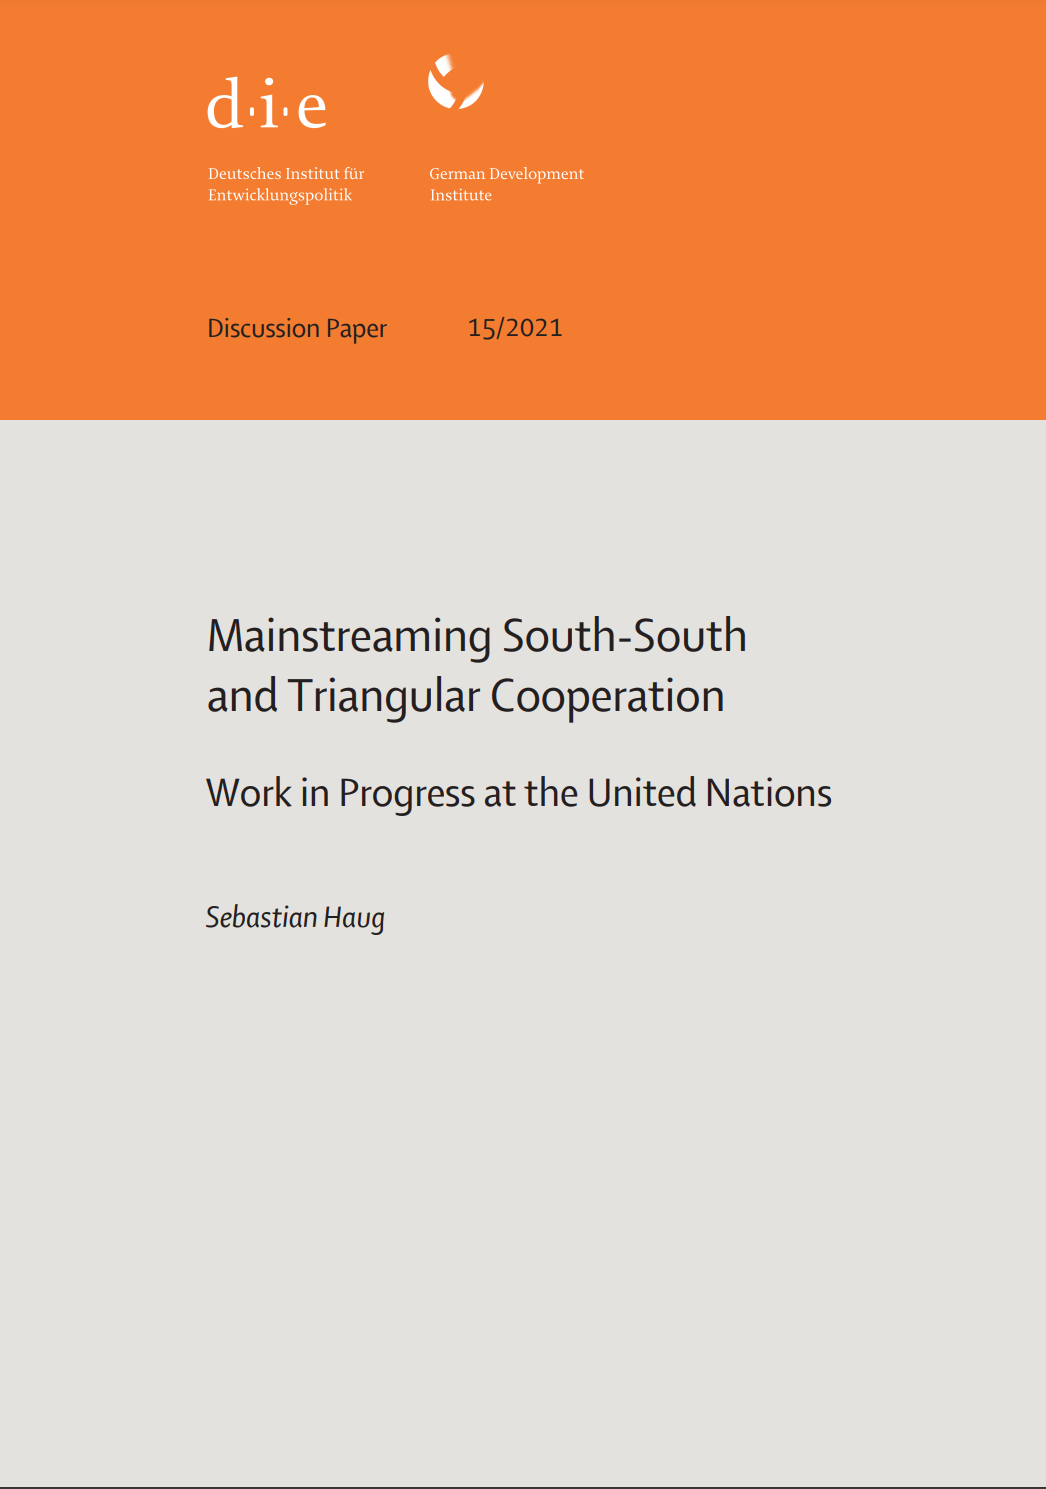 Mainstreaming South-South and Triangular Cooperation Work in Progress at the United Nations